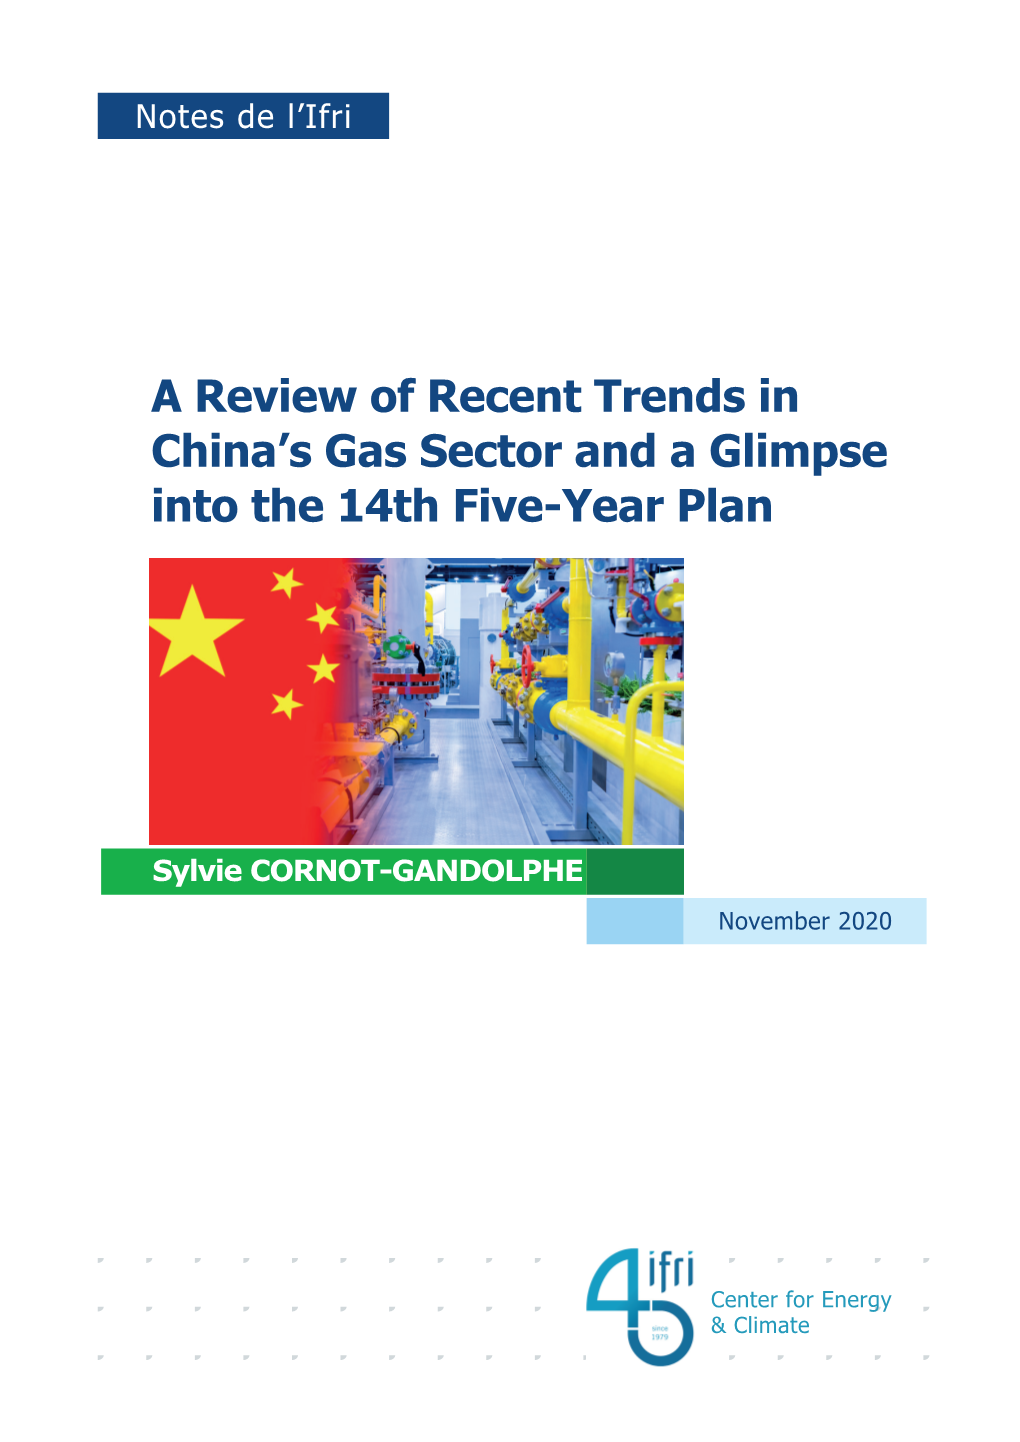 A Review of Recent Trends in China's Gas Sector and a Glimpse Into The